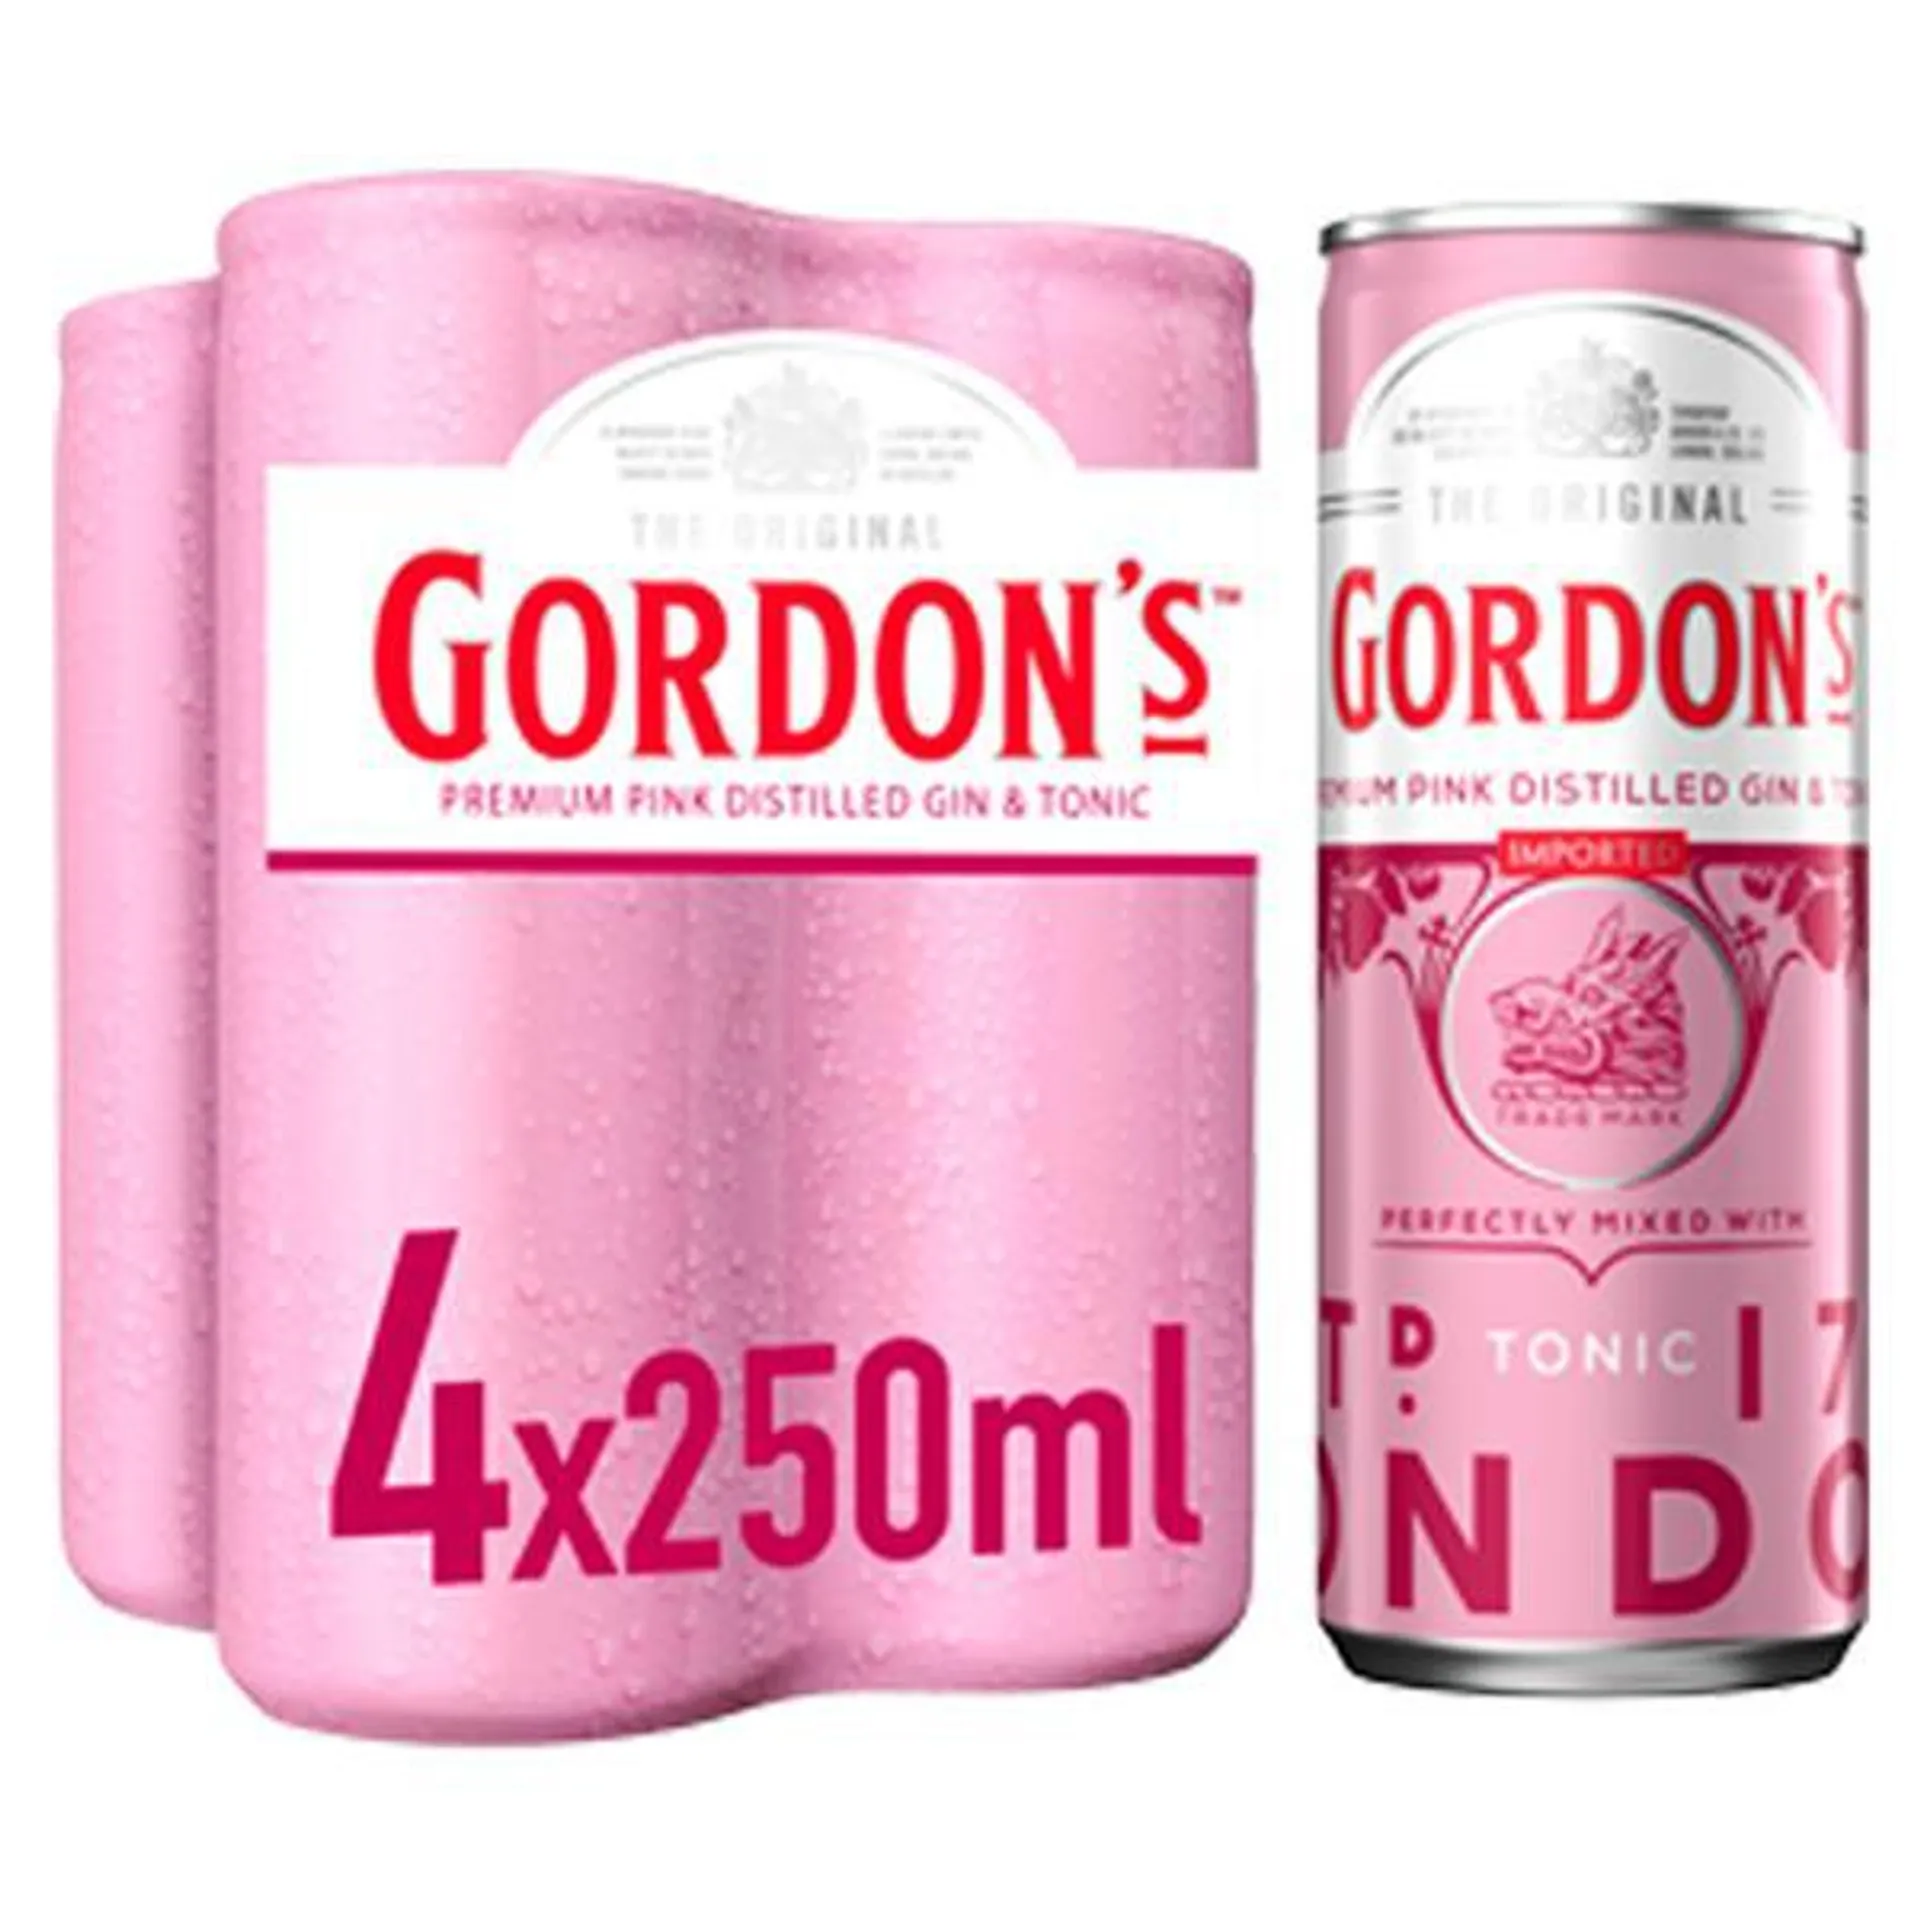 Premium Pink Gin & Tonic 4 x 250ml Ready to Drink Premix Can Multipack